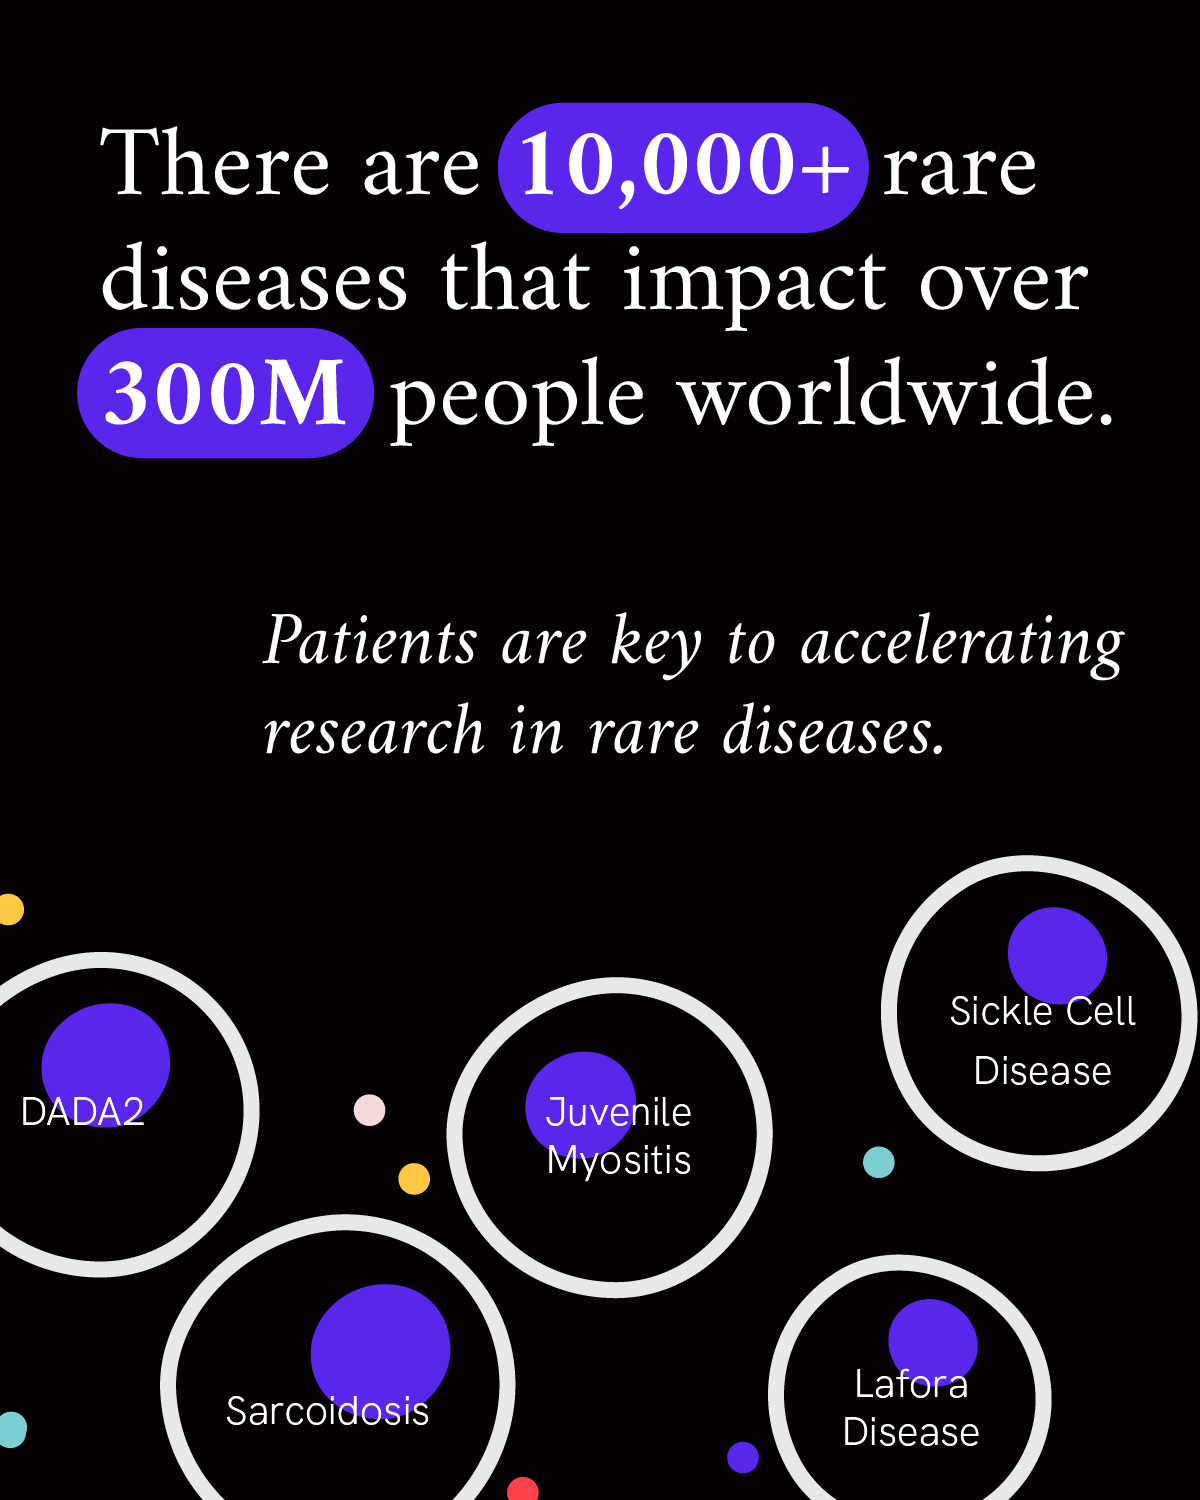 Infographic reads “There are 10,000+ rare diseases that impact over 300M people worldwide,” and “Patients are key to accelerating research in rare diseases.” Four purple circles are set within four white circle outline illustrations of cells displayed with the names of four rare diseases accompanying the text.